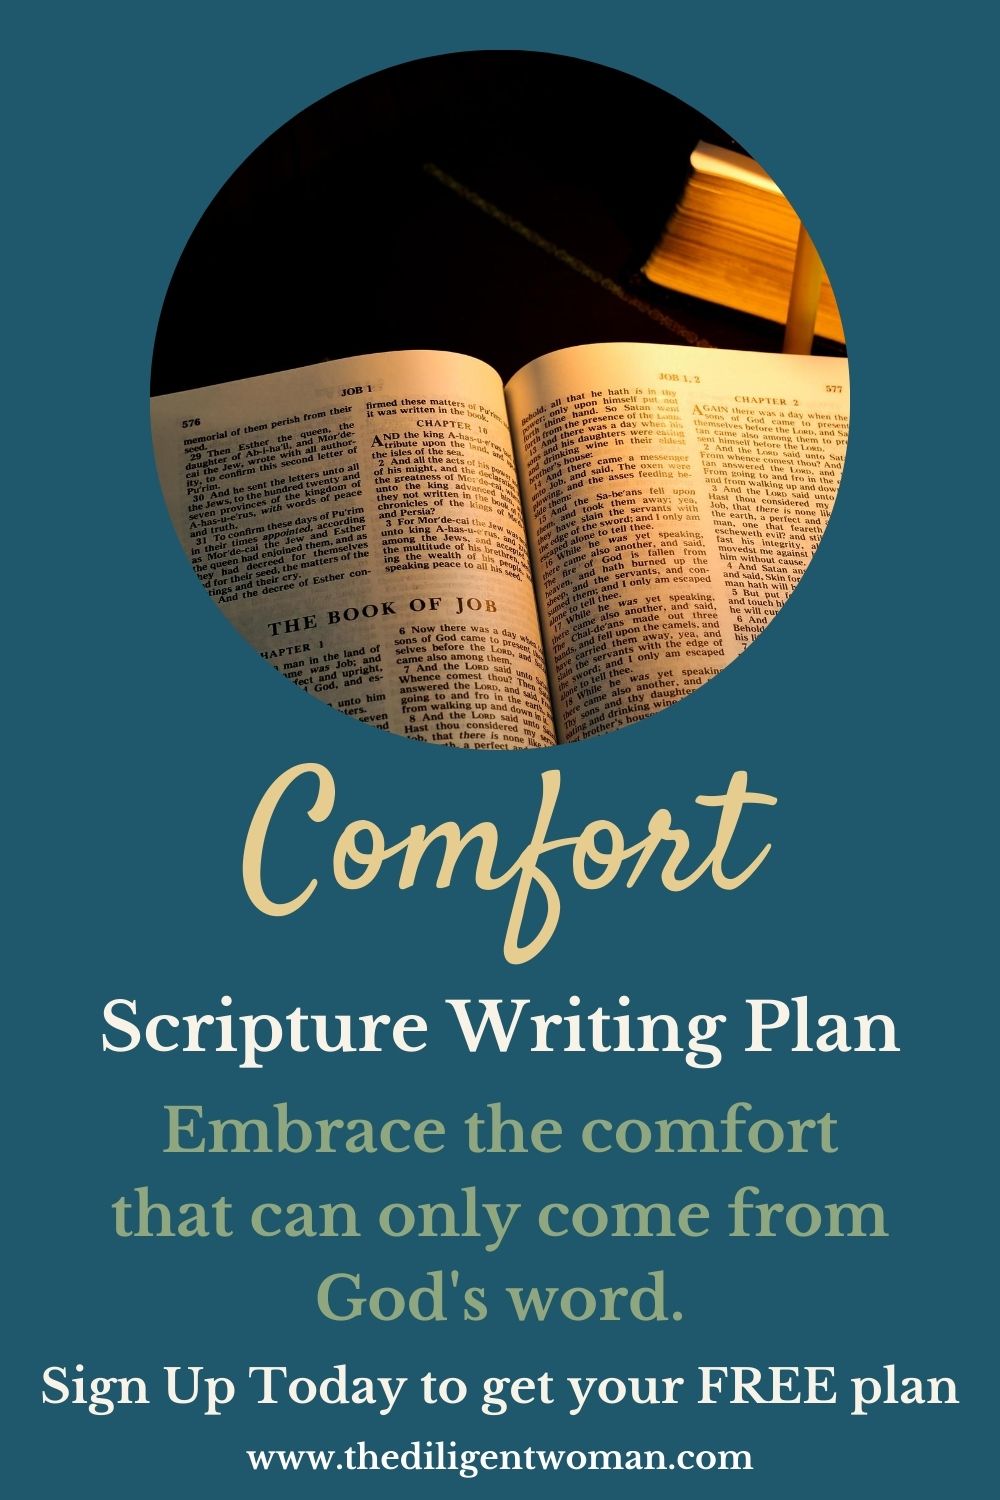 Finding comfort can be difficult when times are hard. This month's scripture writing is full of verses about comfort and verses that bring comfort. Check it out and be comforted by God's Word!